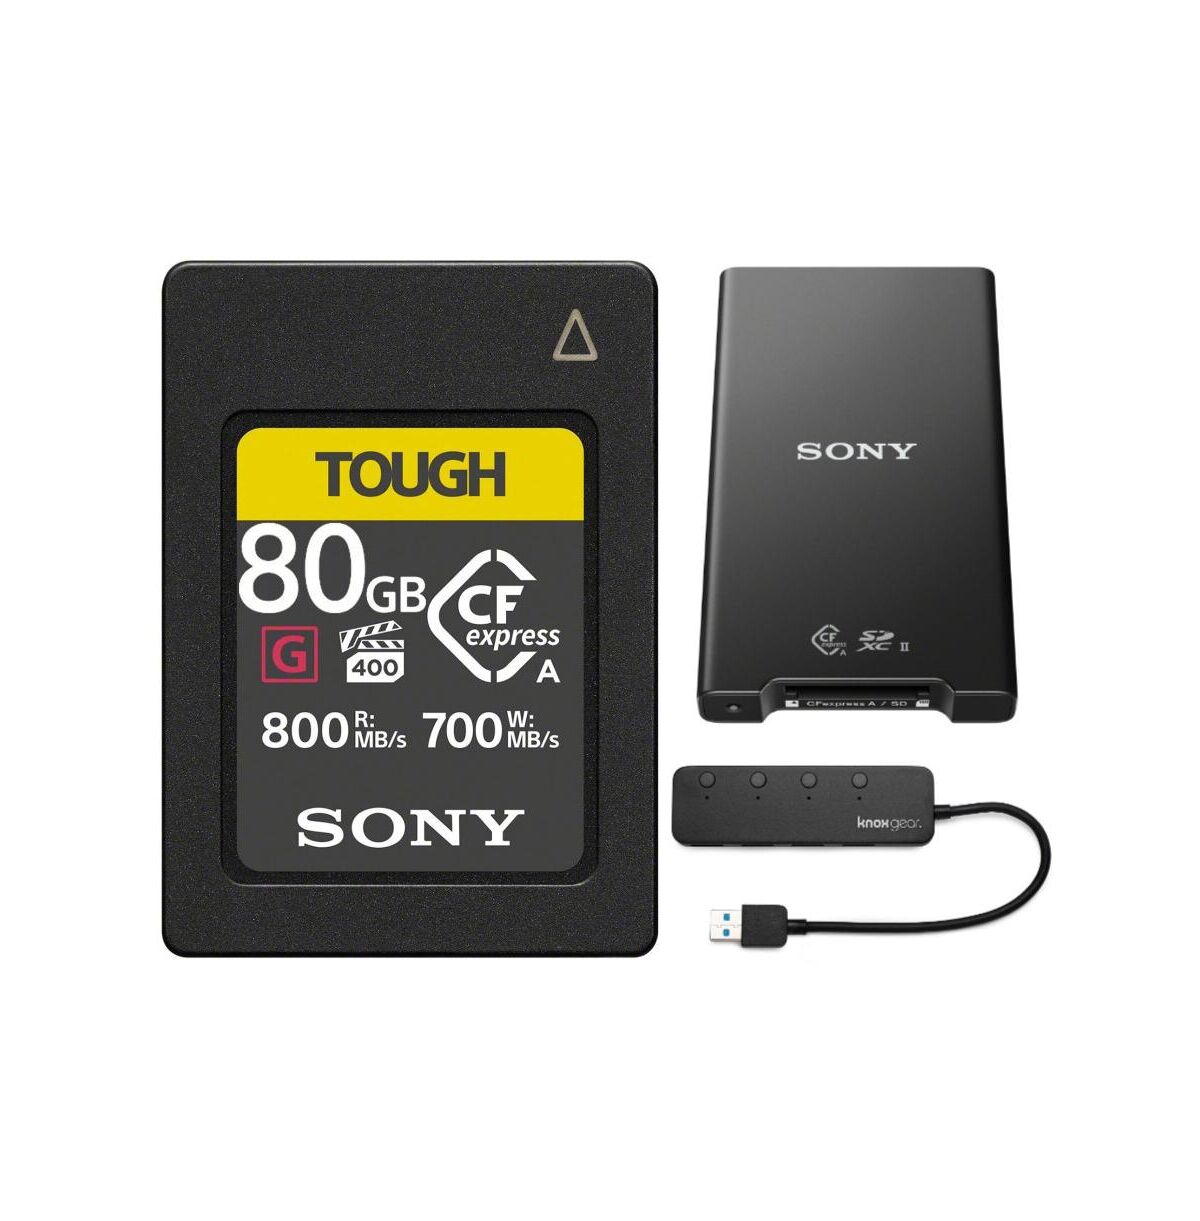 Sony Cfexpress Type A 80Gb Memory Card With Card Reader And 4 Port Usb Hub - Black